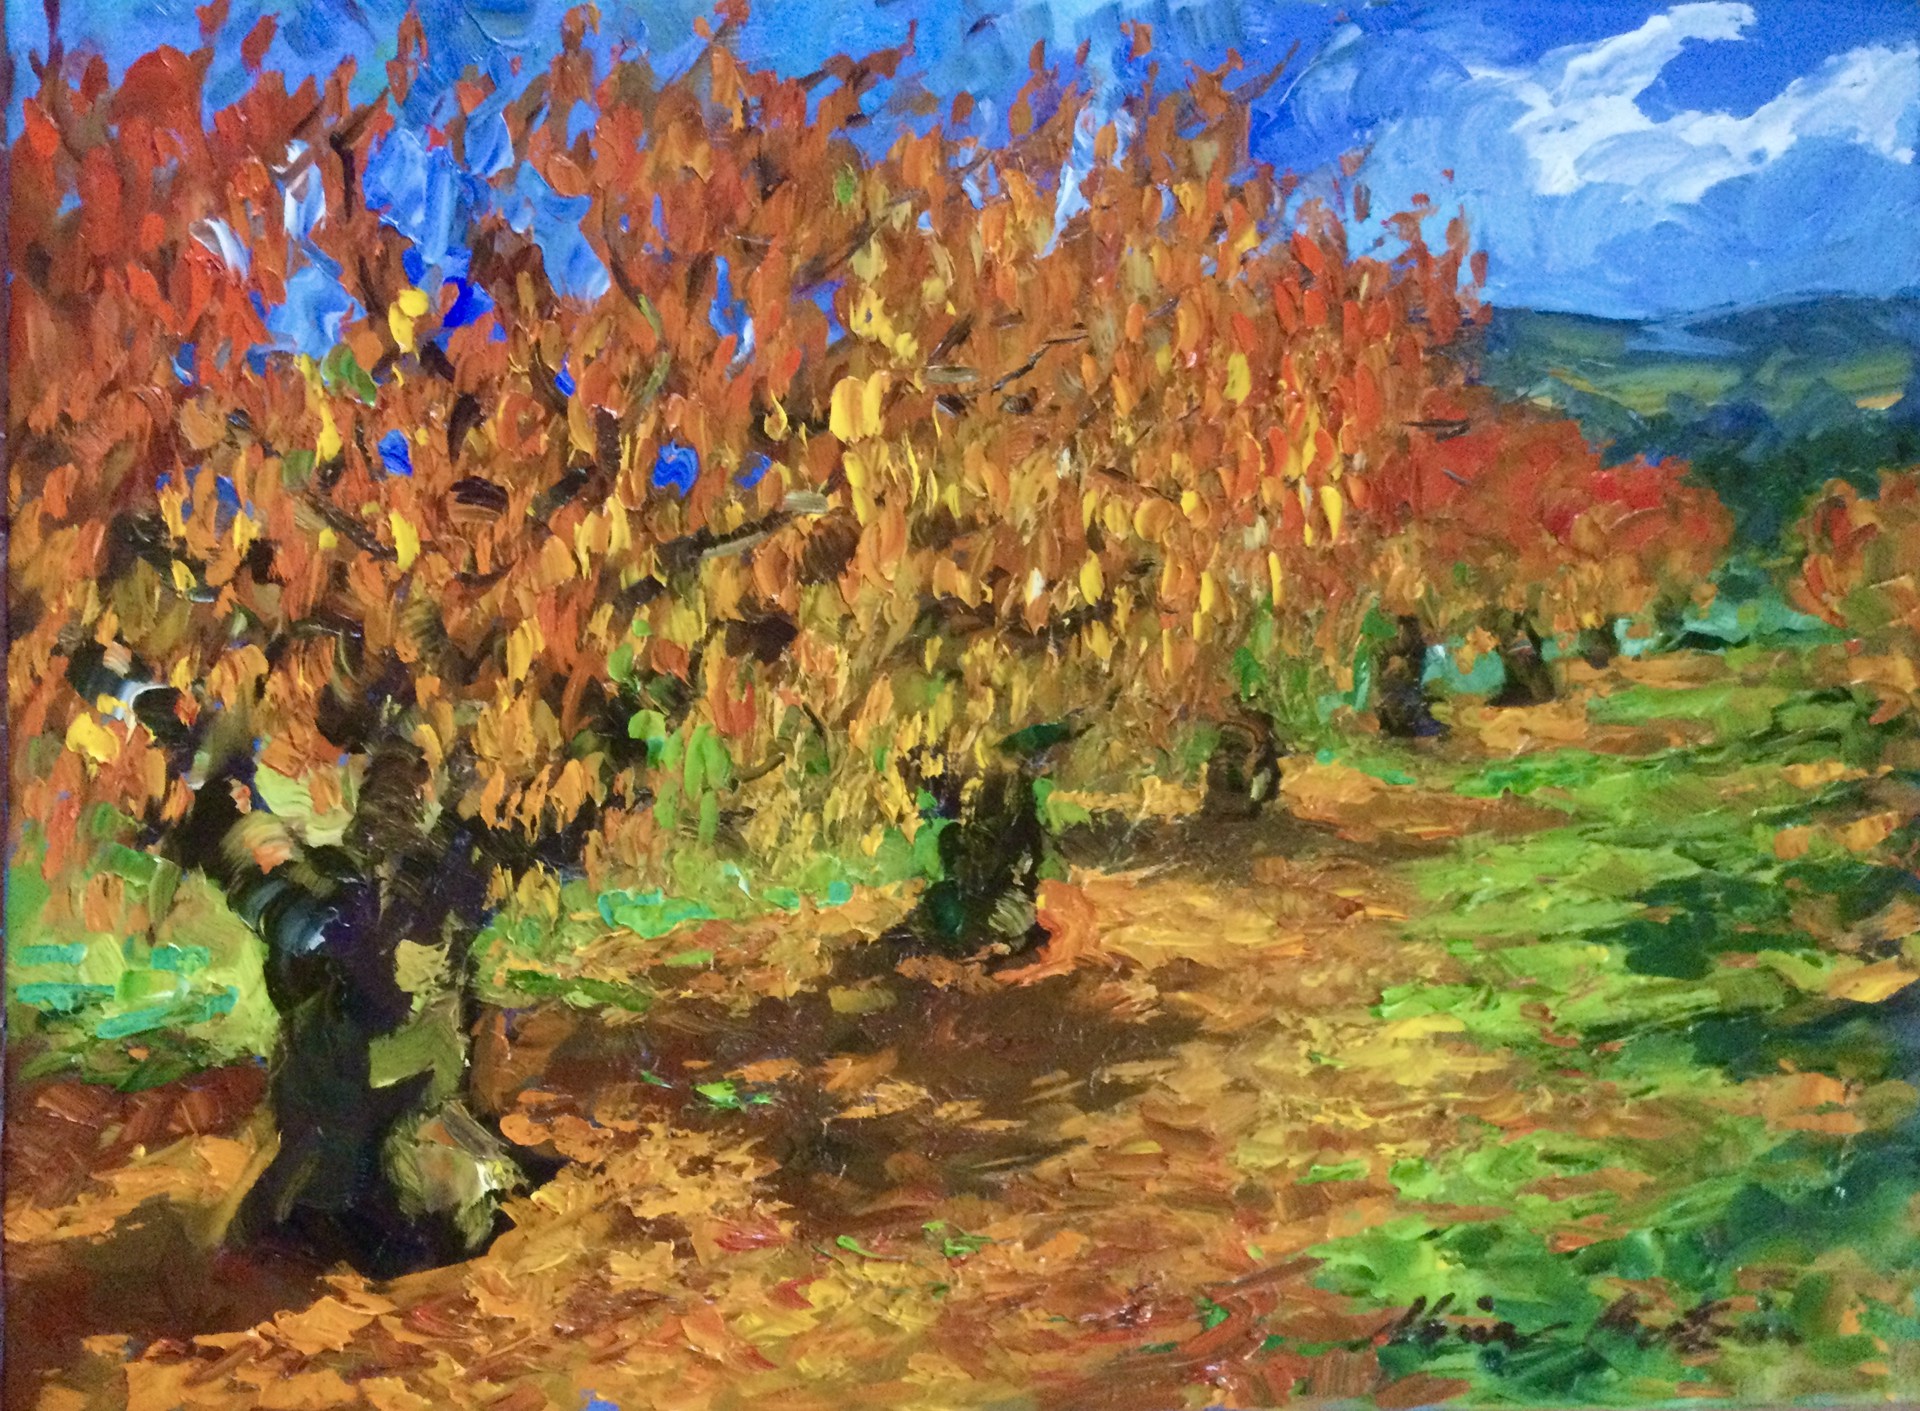 Luberon Cherry Orchard In The Fall by Maria Bertrán